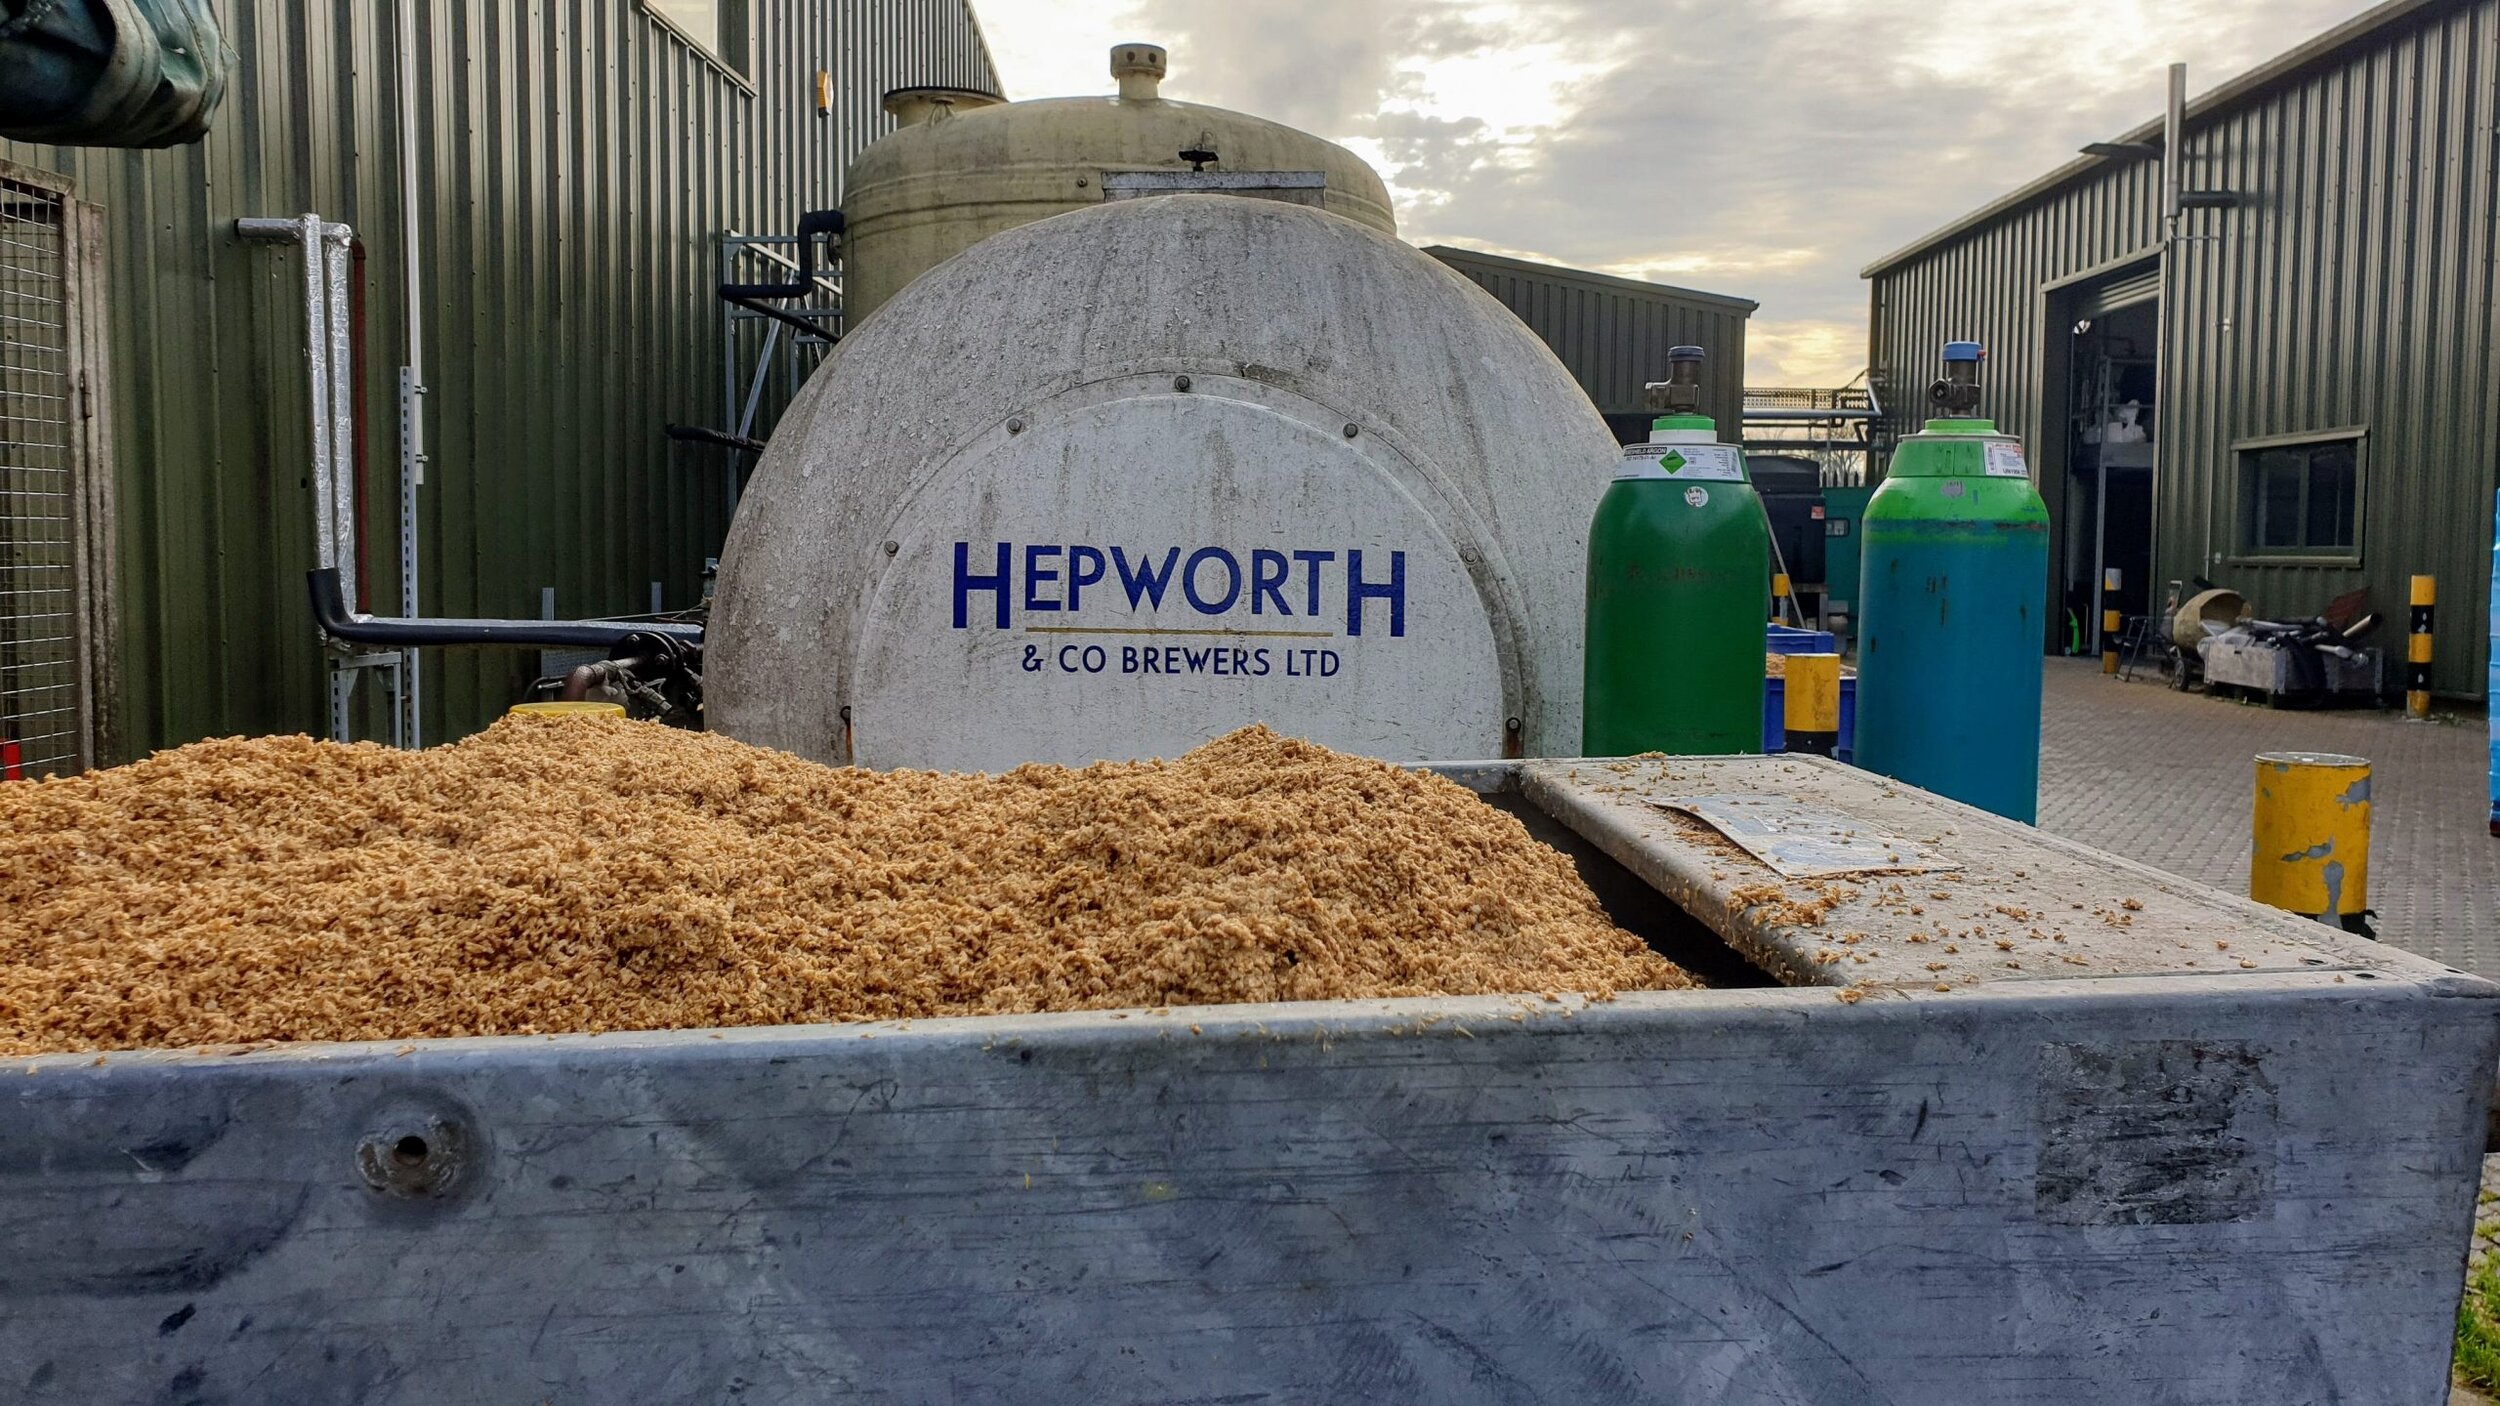 Picture of the spent barley from Hepworth Brewery in Sussex for the Beer Yeti review.